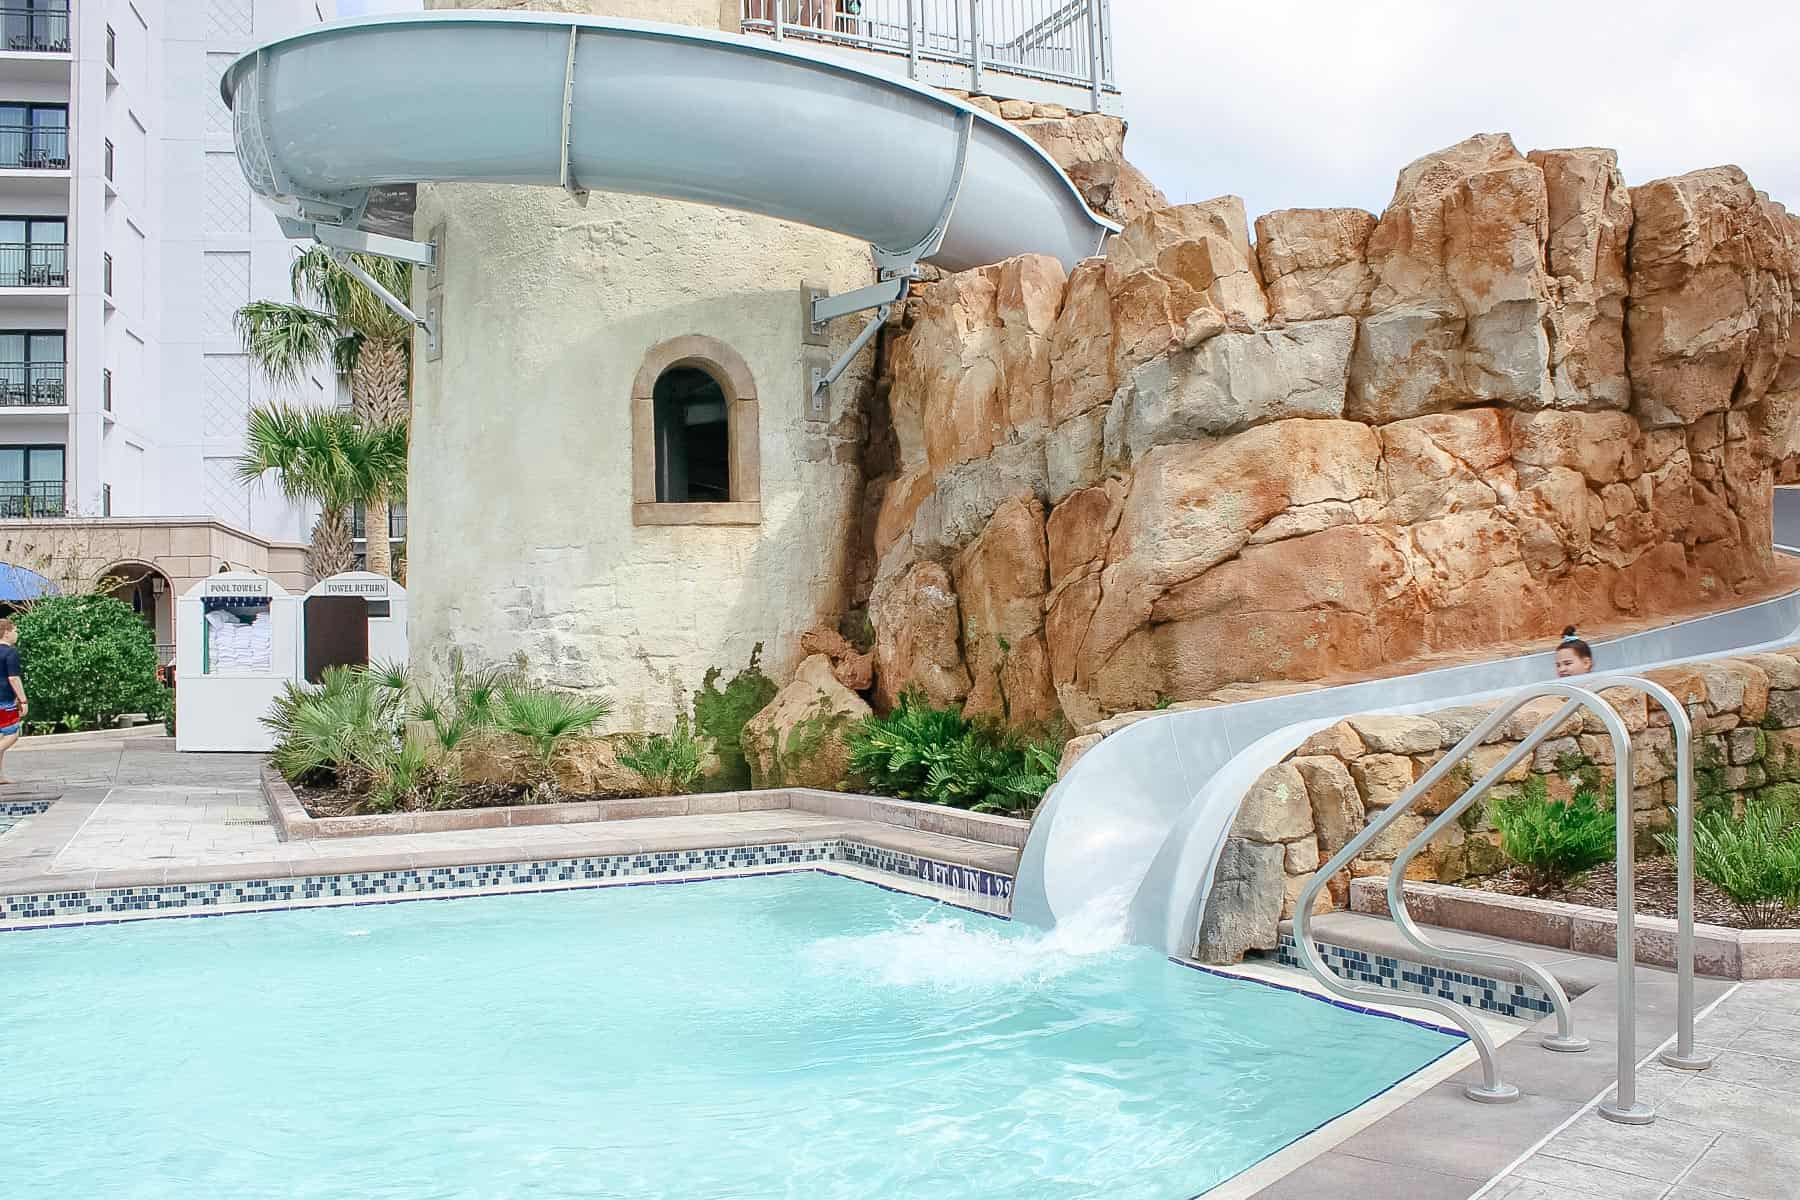 the water slide as it wraps around the tile and flows through the rocks 